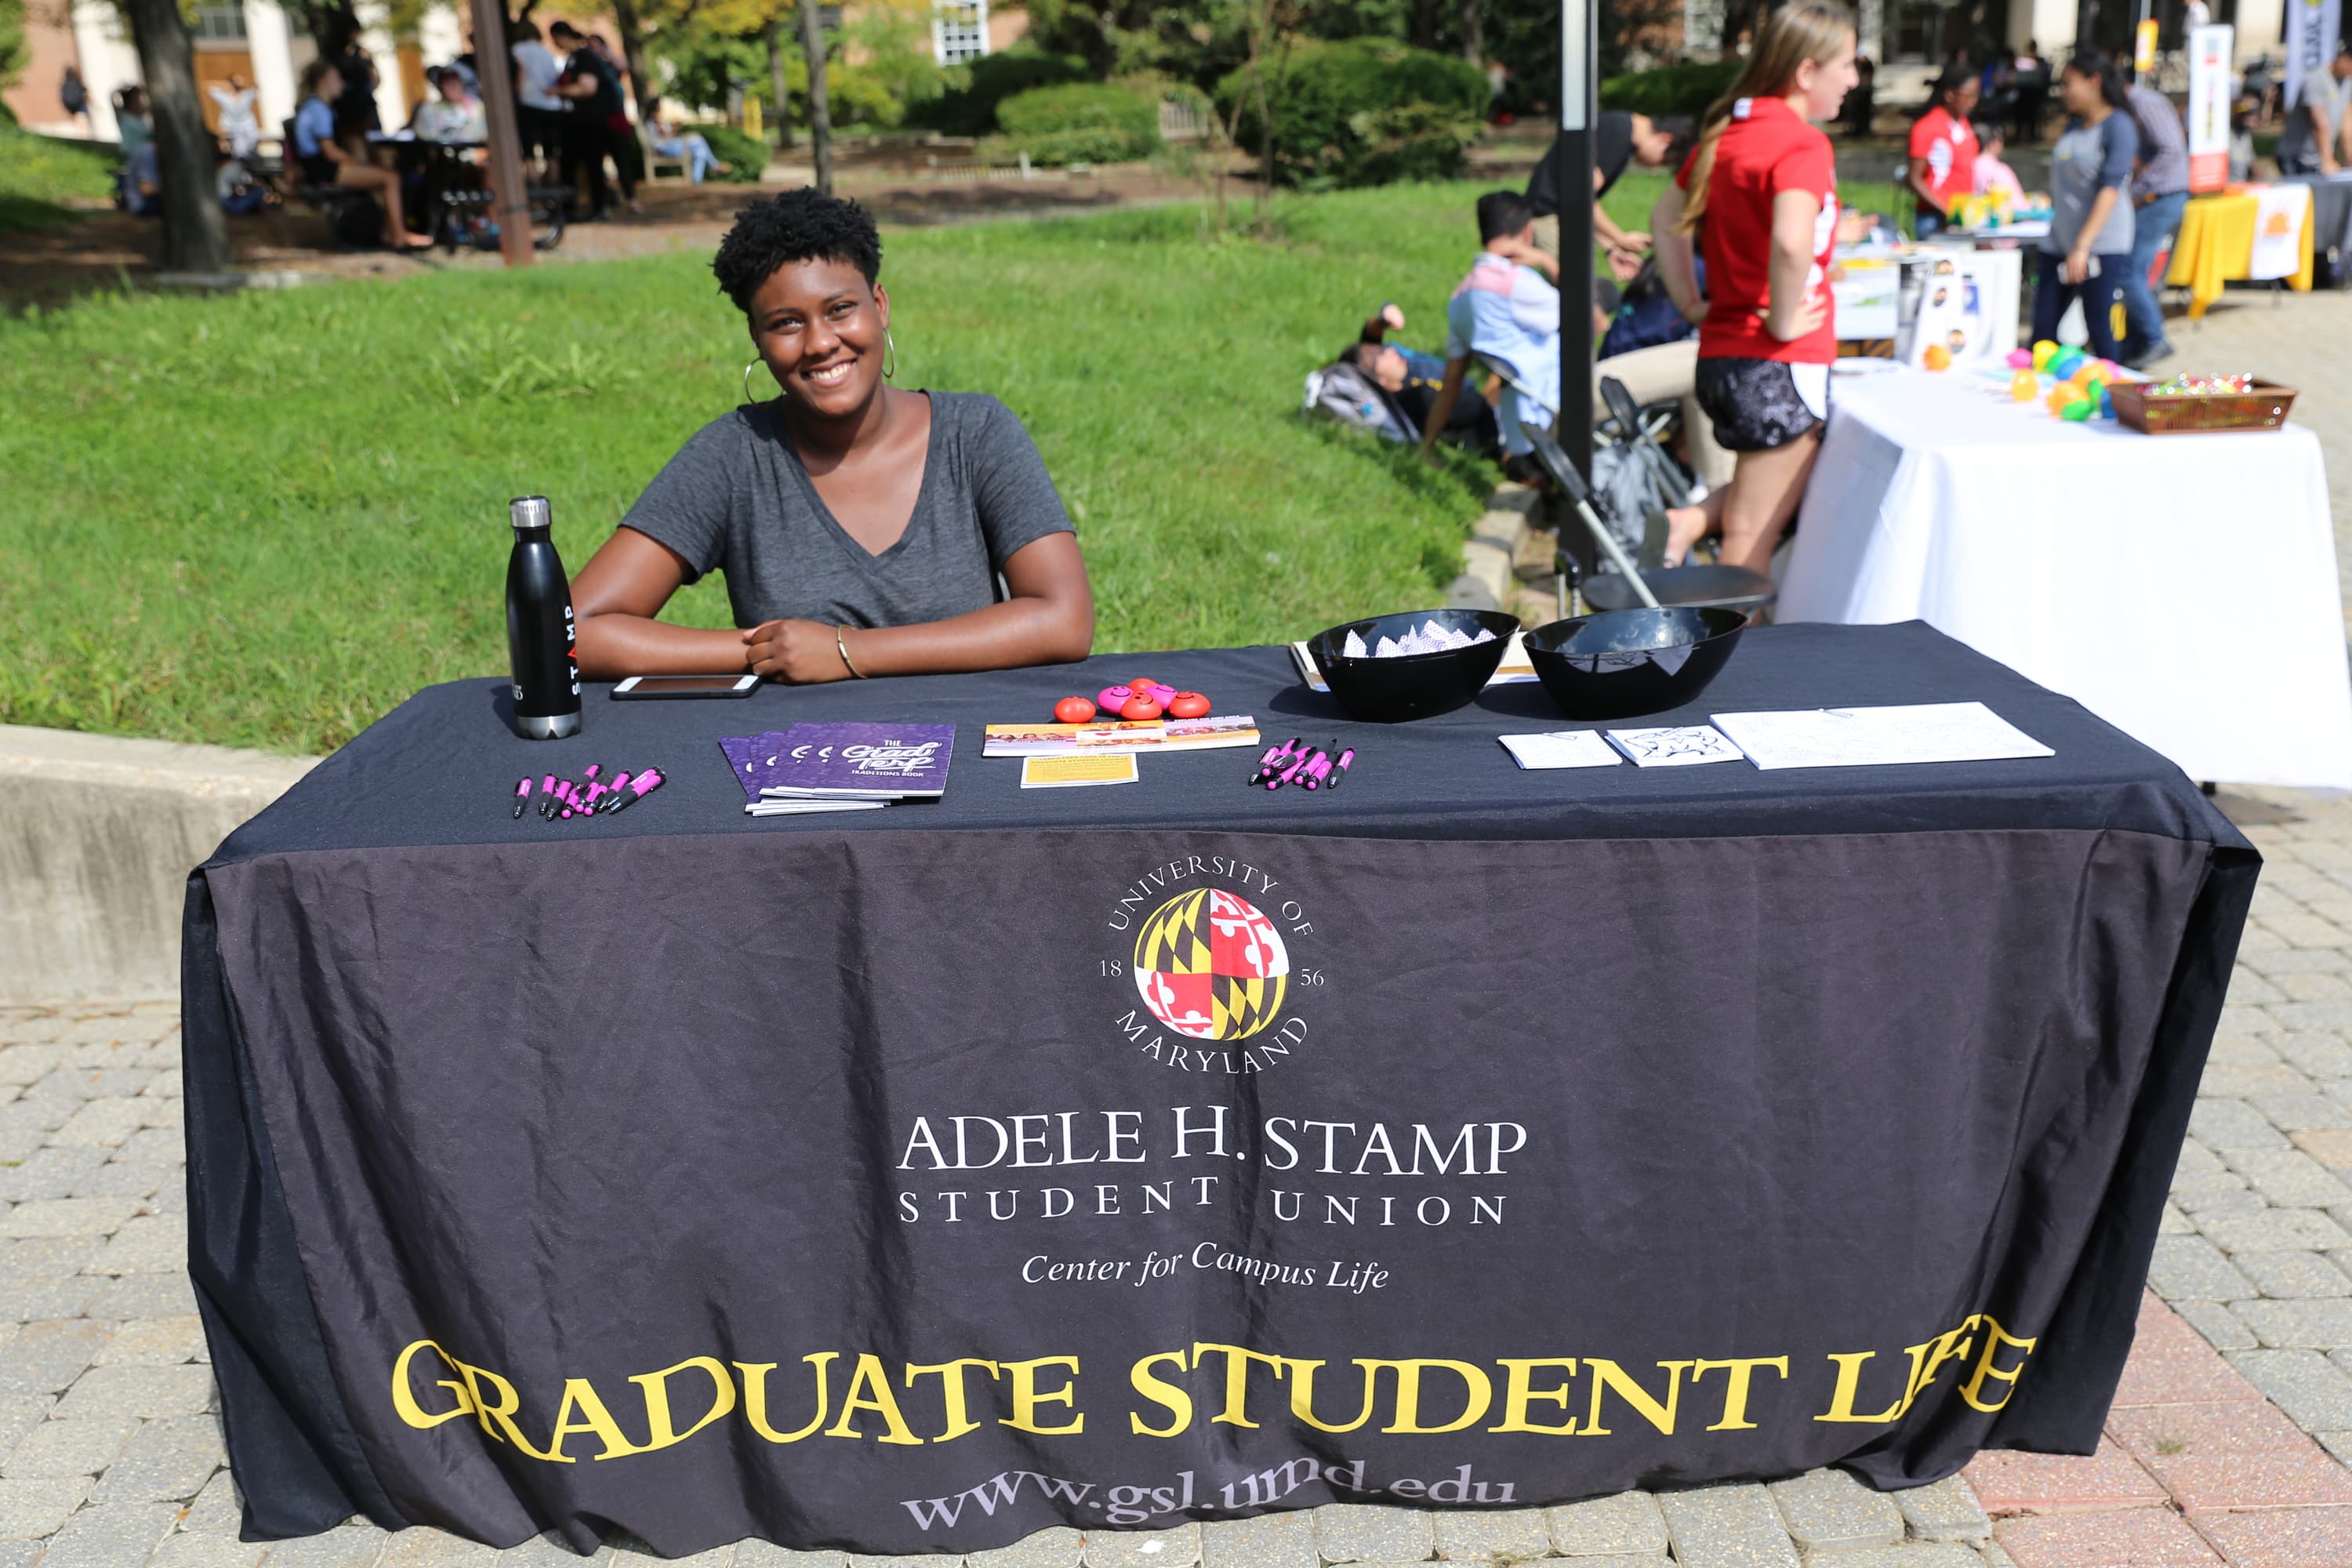 Black woman smiling at the camera, sitting beside a table with papers and pens on top. Tablecloth says Adele H. Stamp Student Union Center for Campus Life: Graduate Student Life